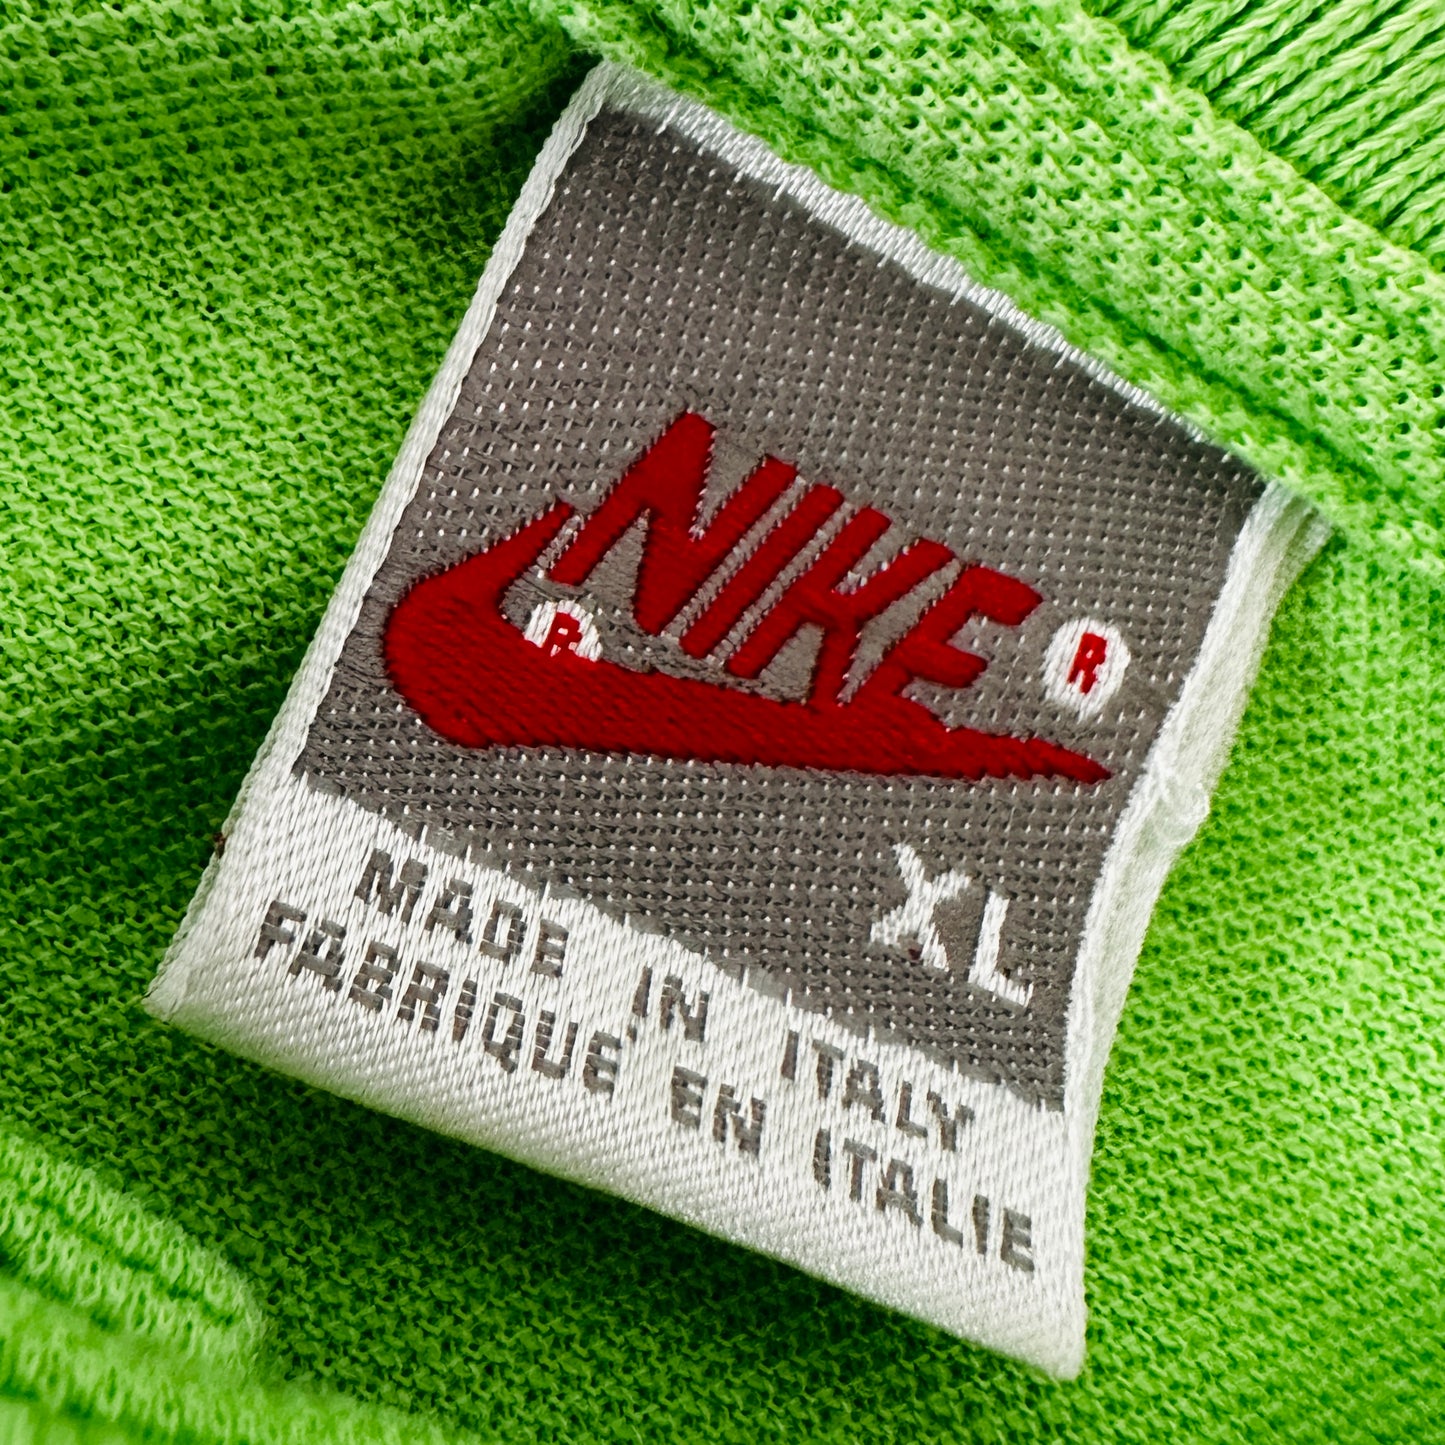 Nike Vintage 80s Polo Shirt - XL - Made in Italy